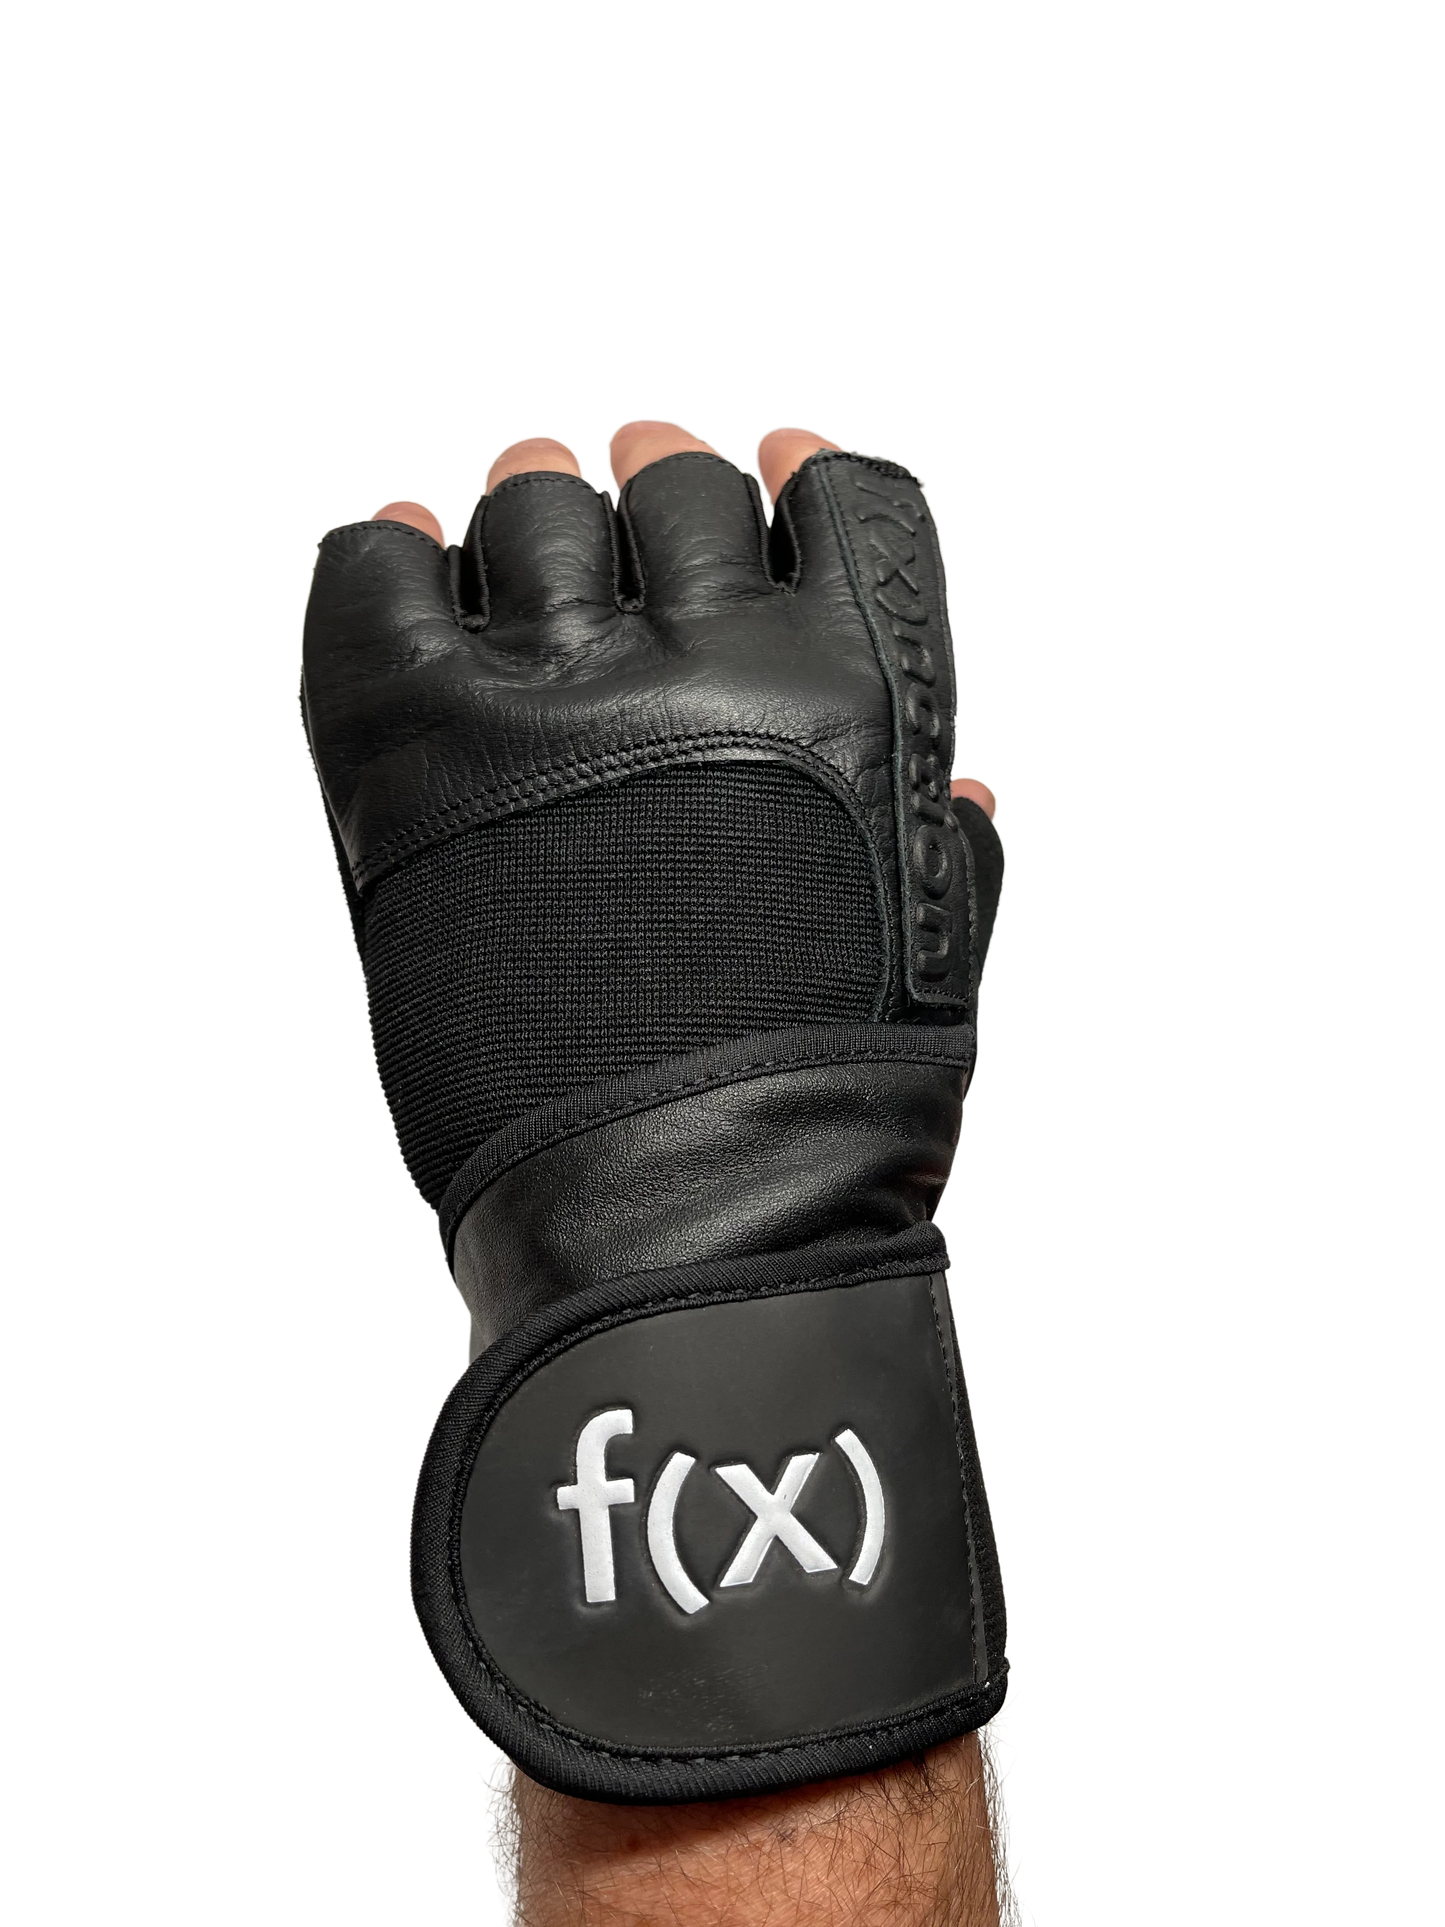 F(x)nction Wrist Guards